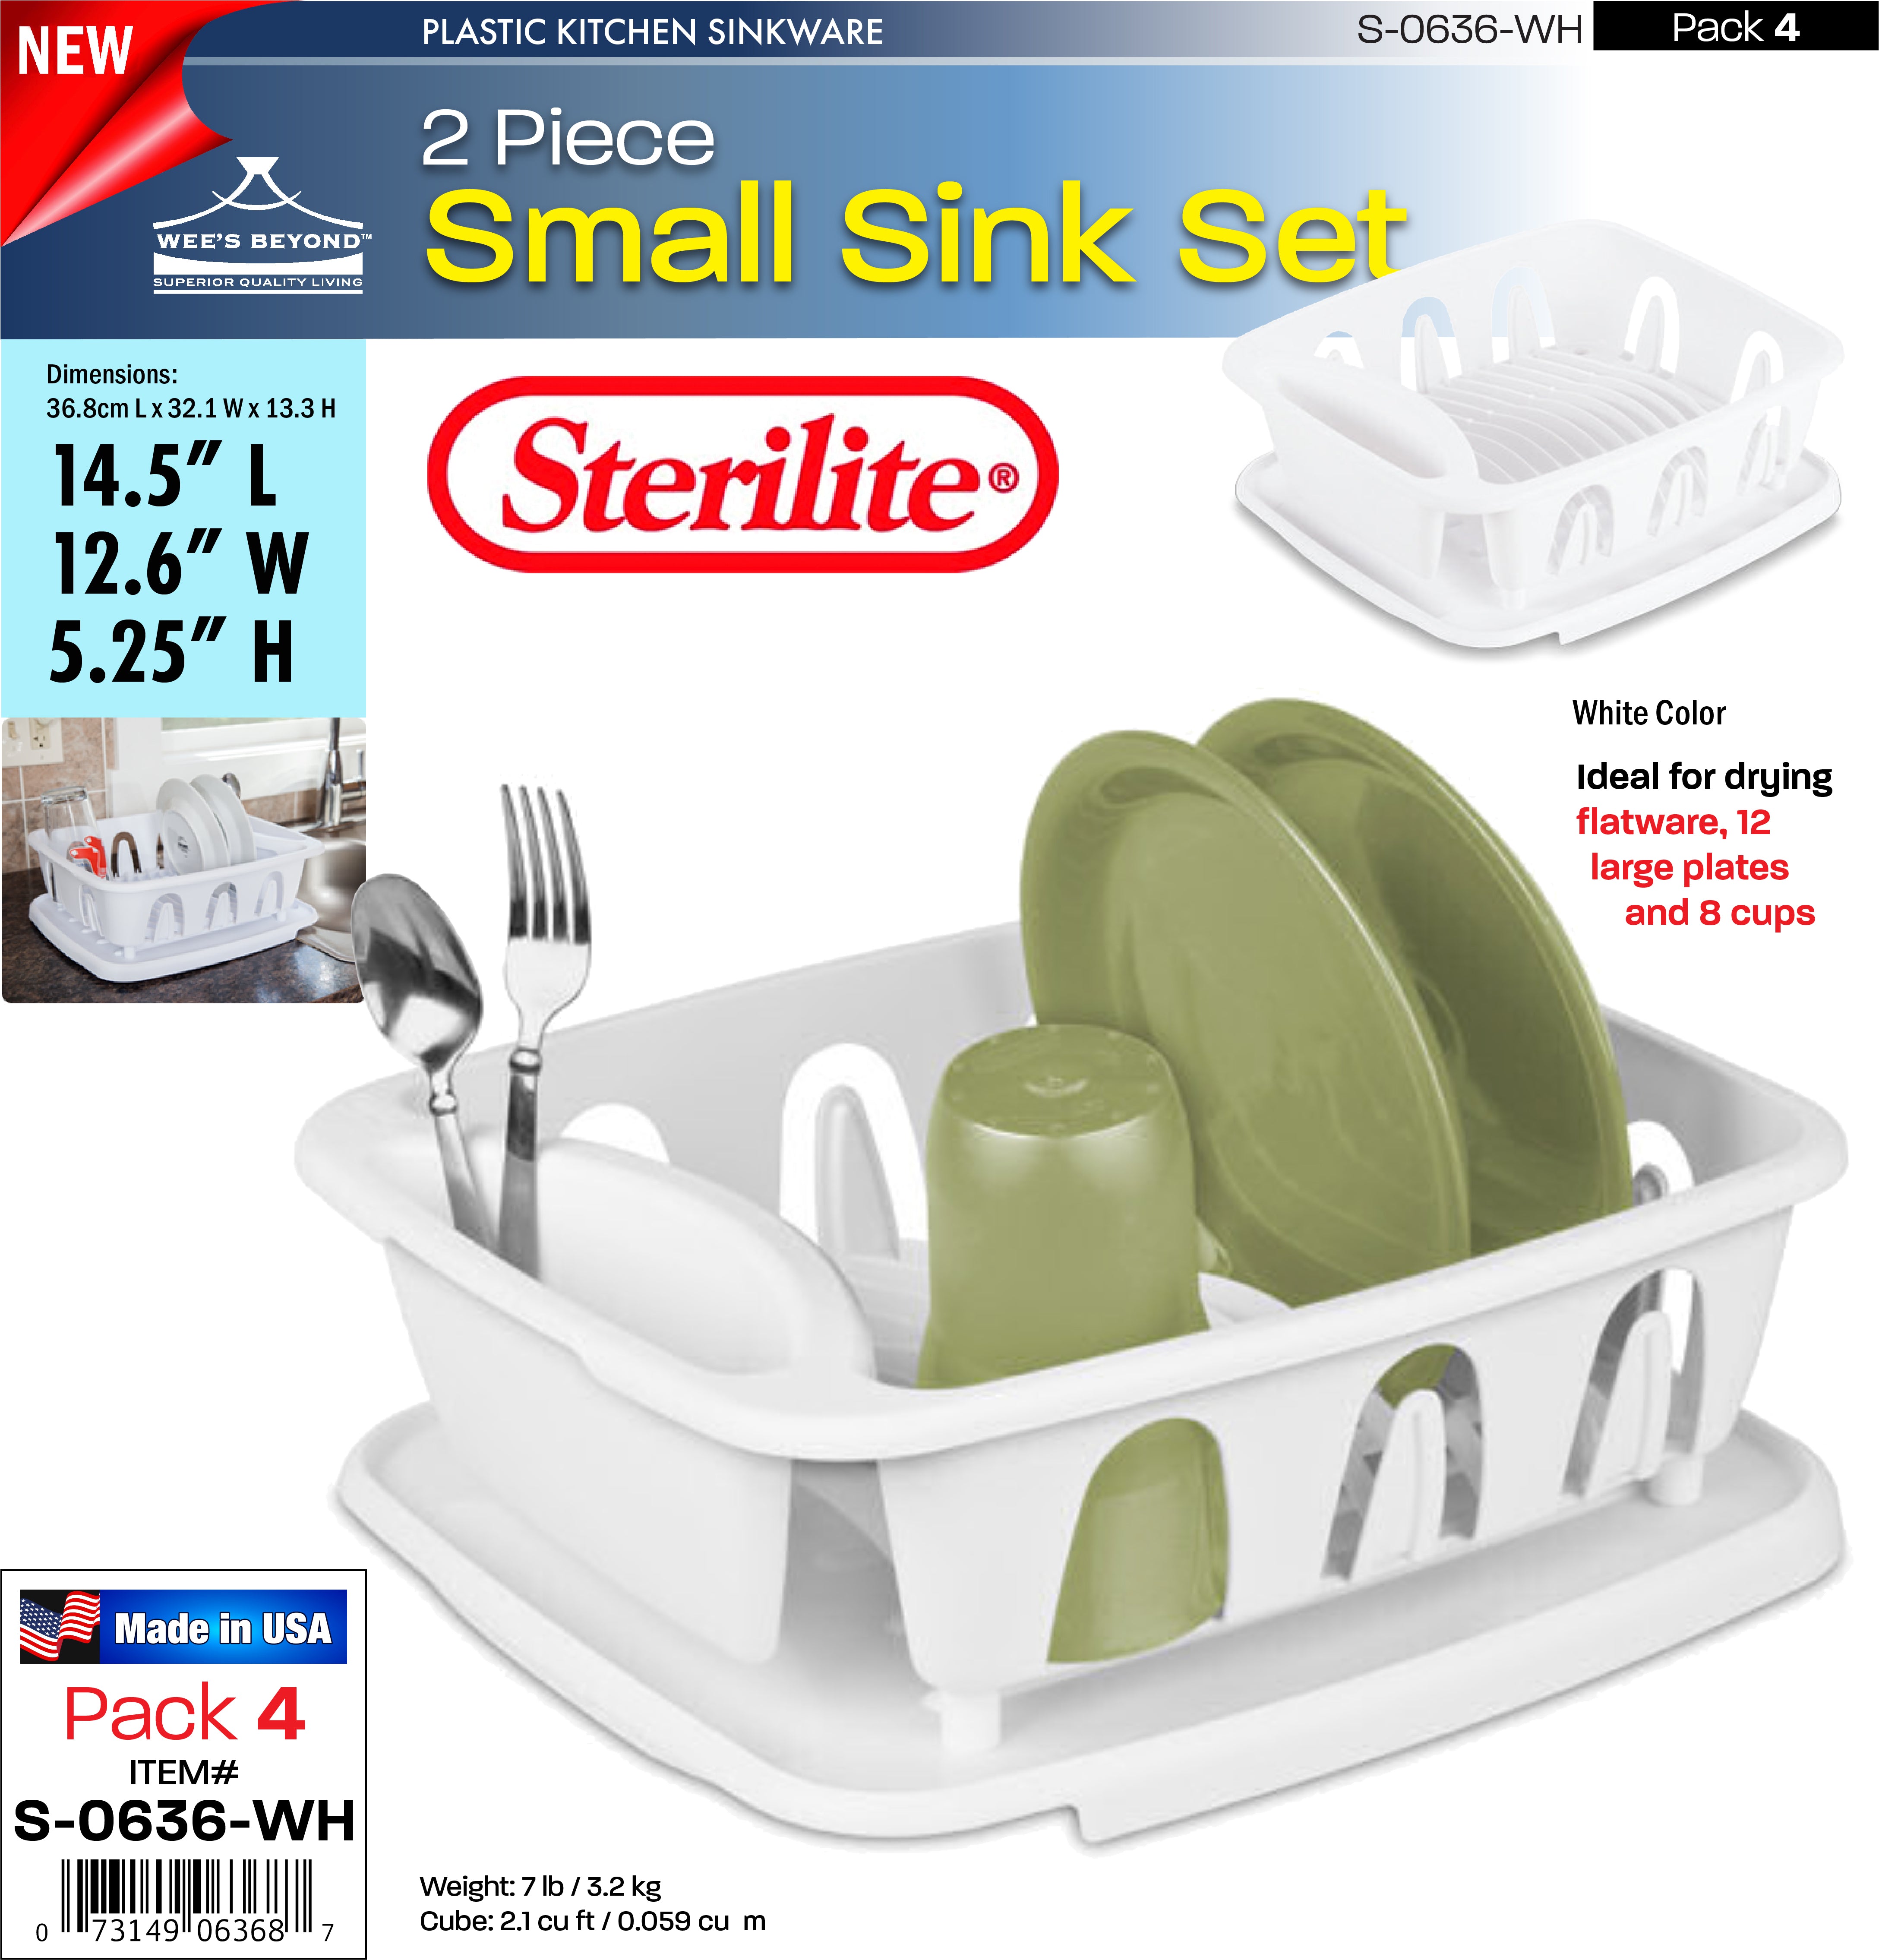 S-0621-RD Sterilite Plastic 2 Pcs Drainer Sink Set - Red (case pack 6 –  WEE'S BEYOND WHOLESALE